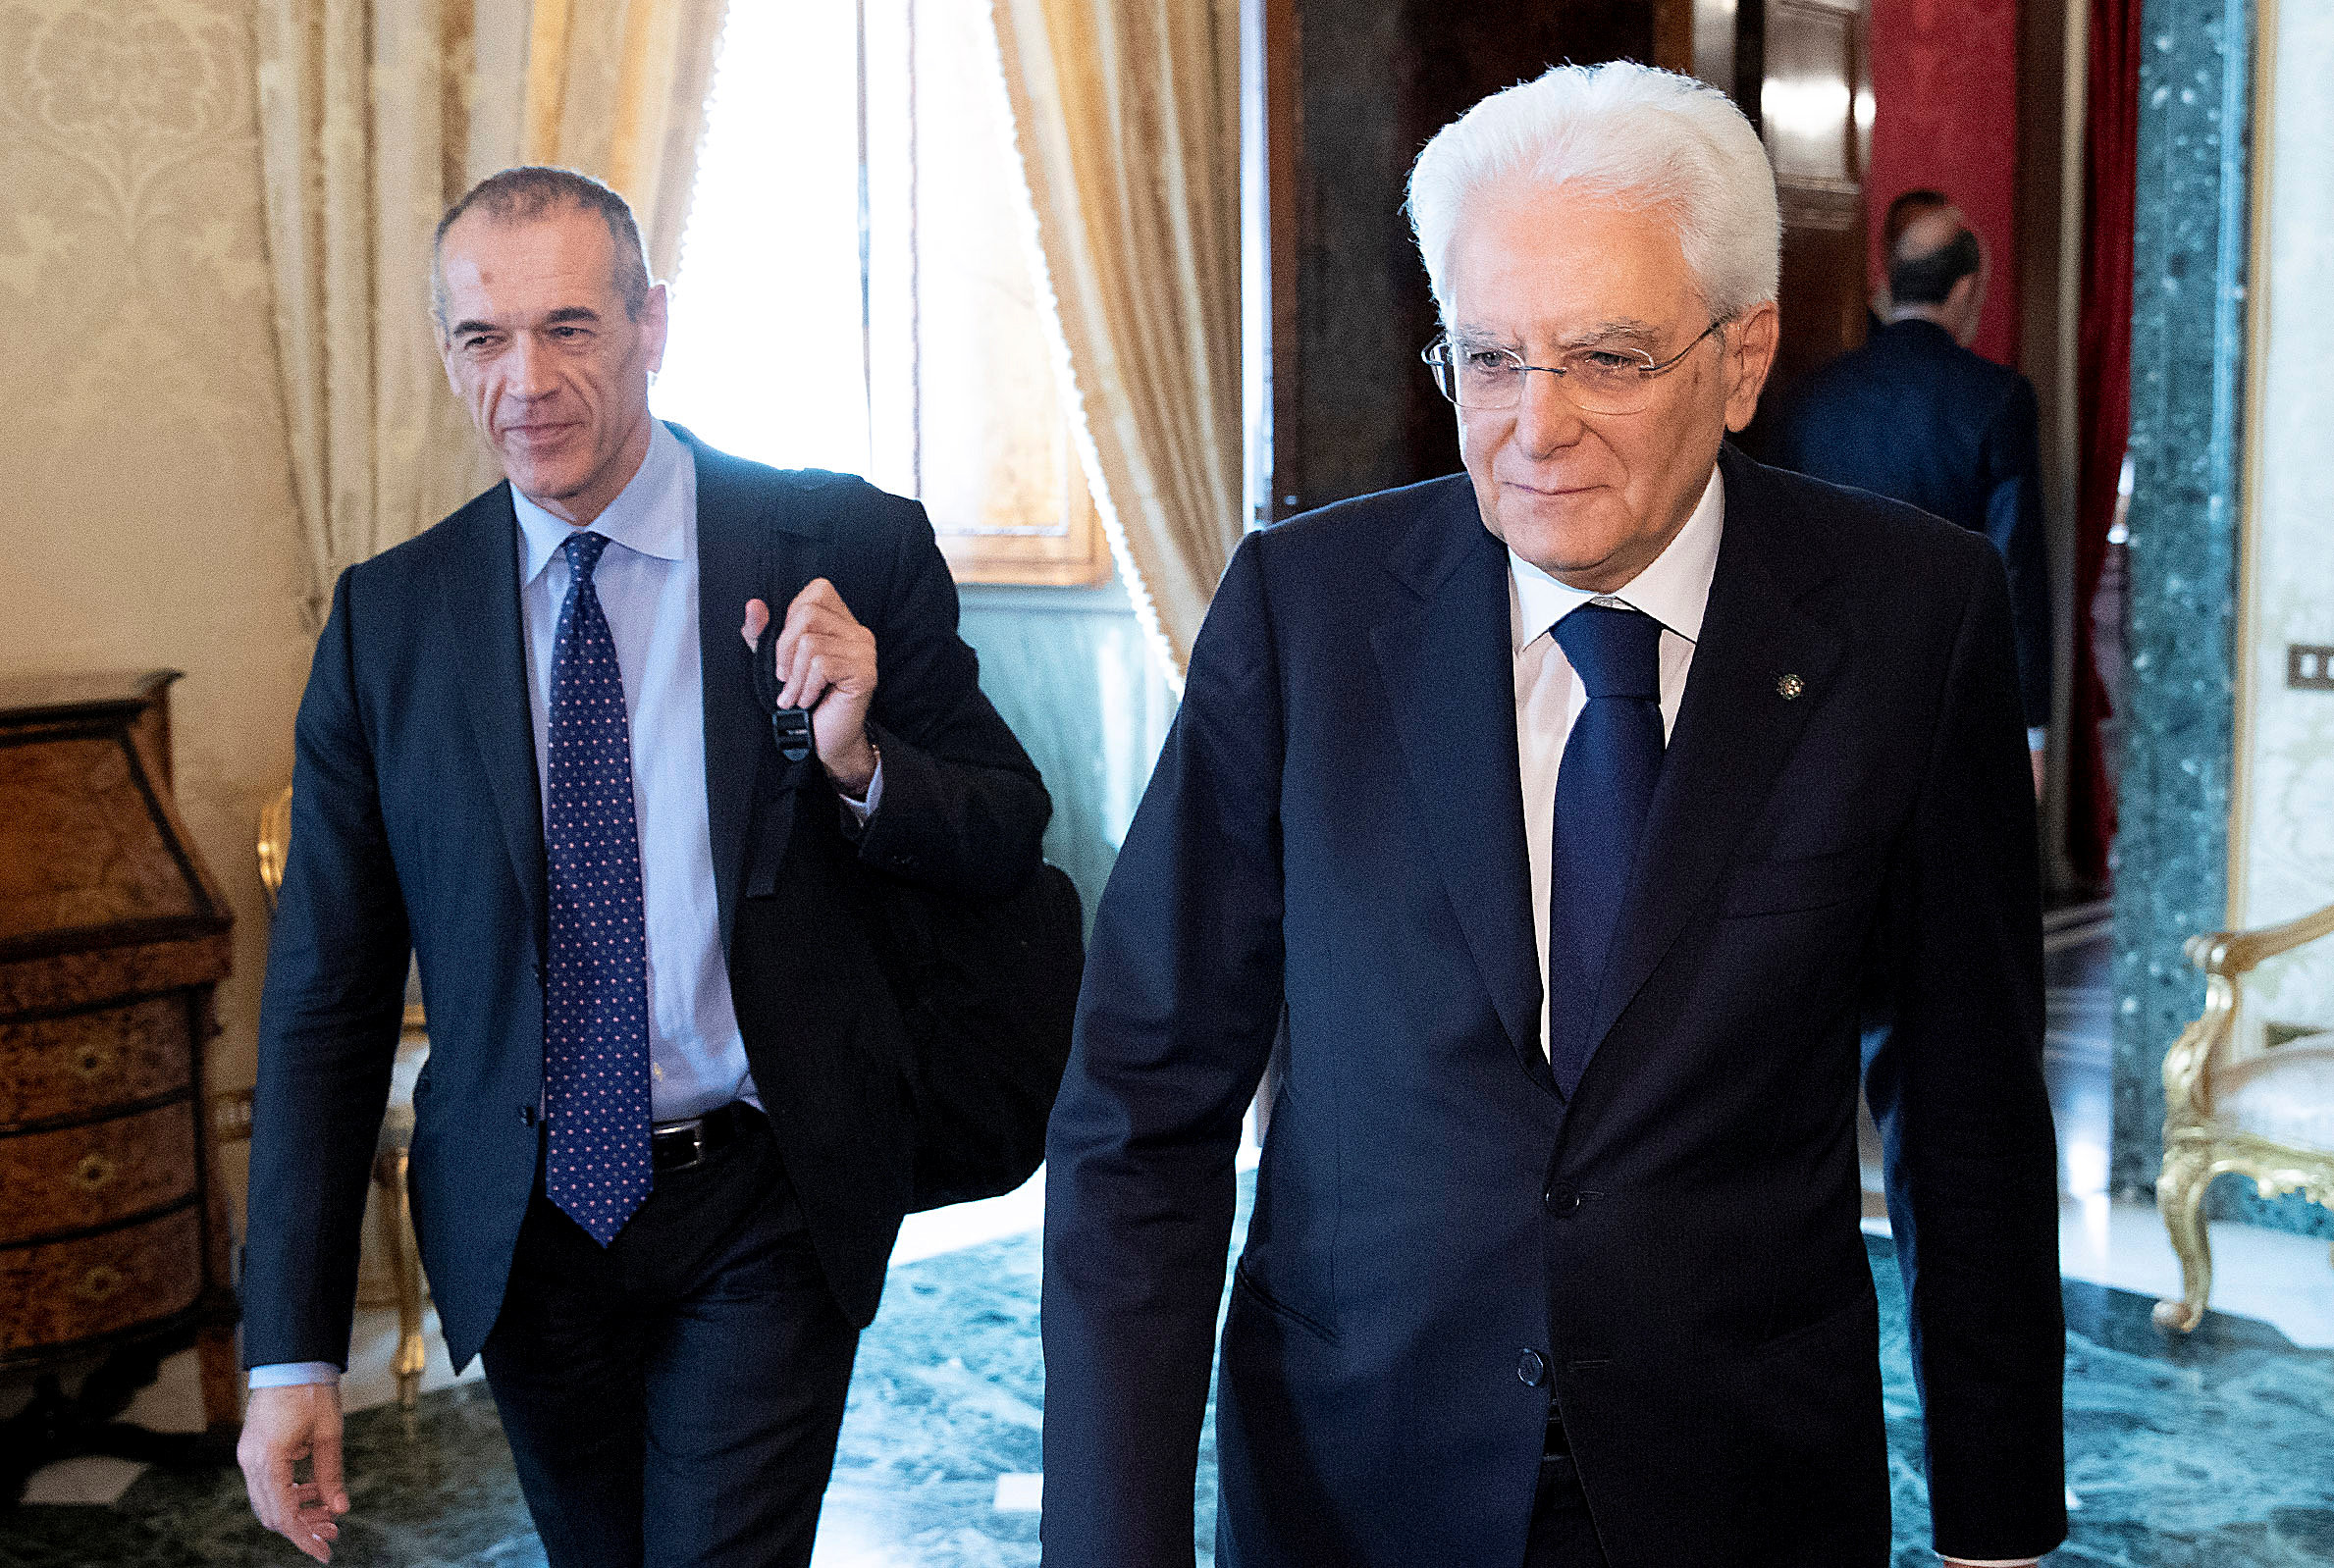 Politicians push for July election as Italy seeks exit from crisis